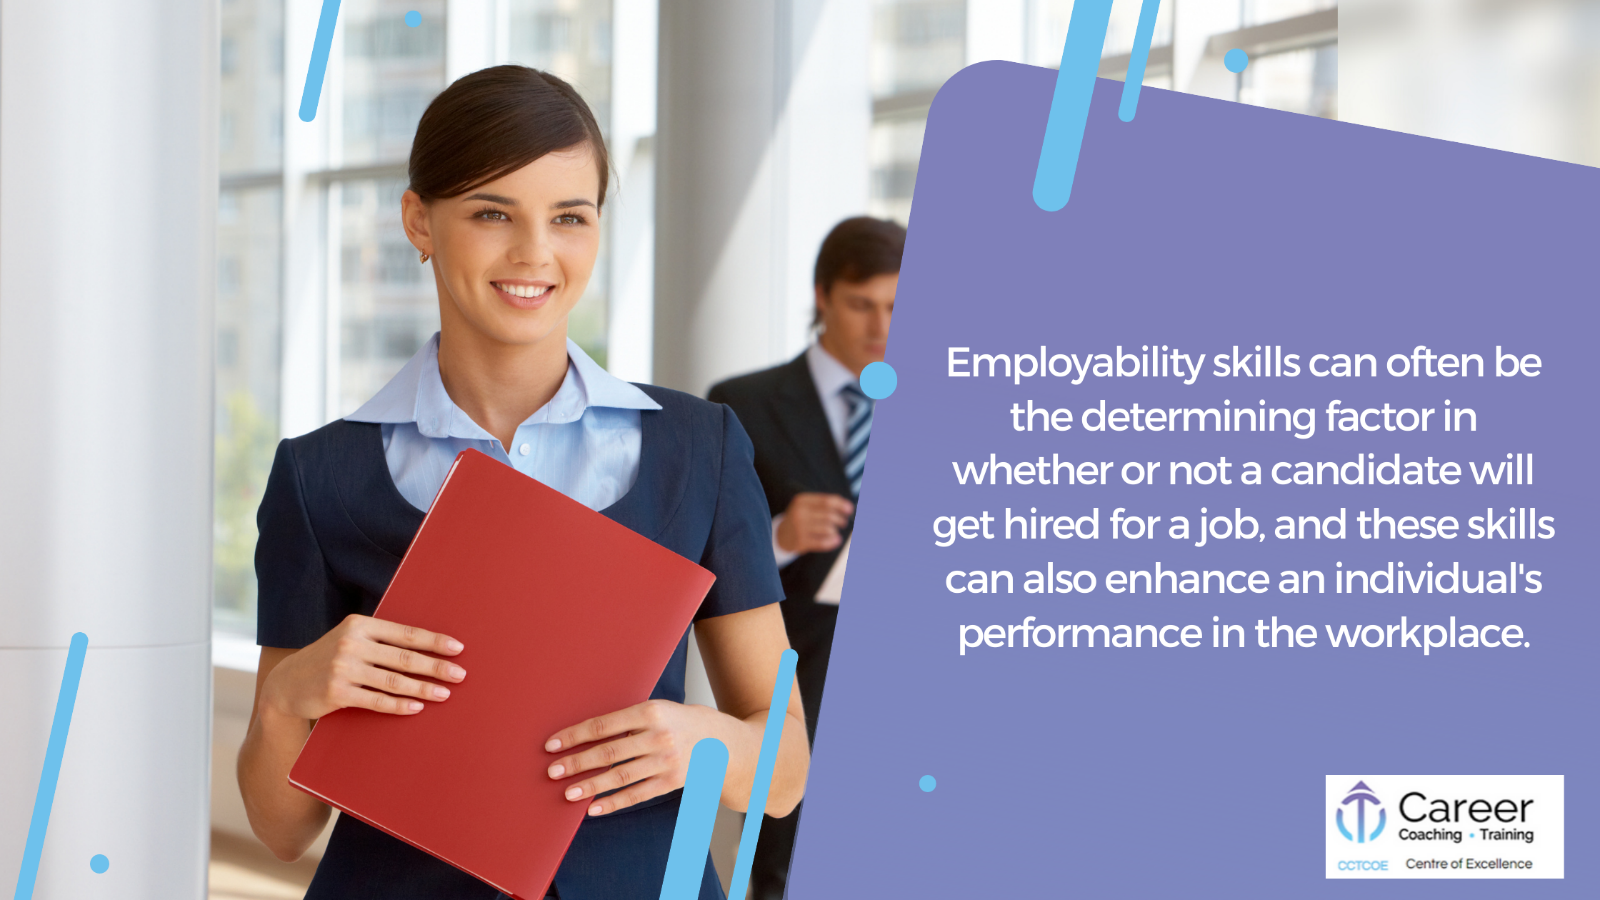 Employability skills can often be the determining factor in whether or not a candidate will get hired for a job, and these skills can also enhance an individual's performance in the workplace.,